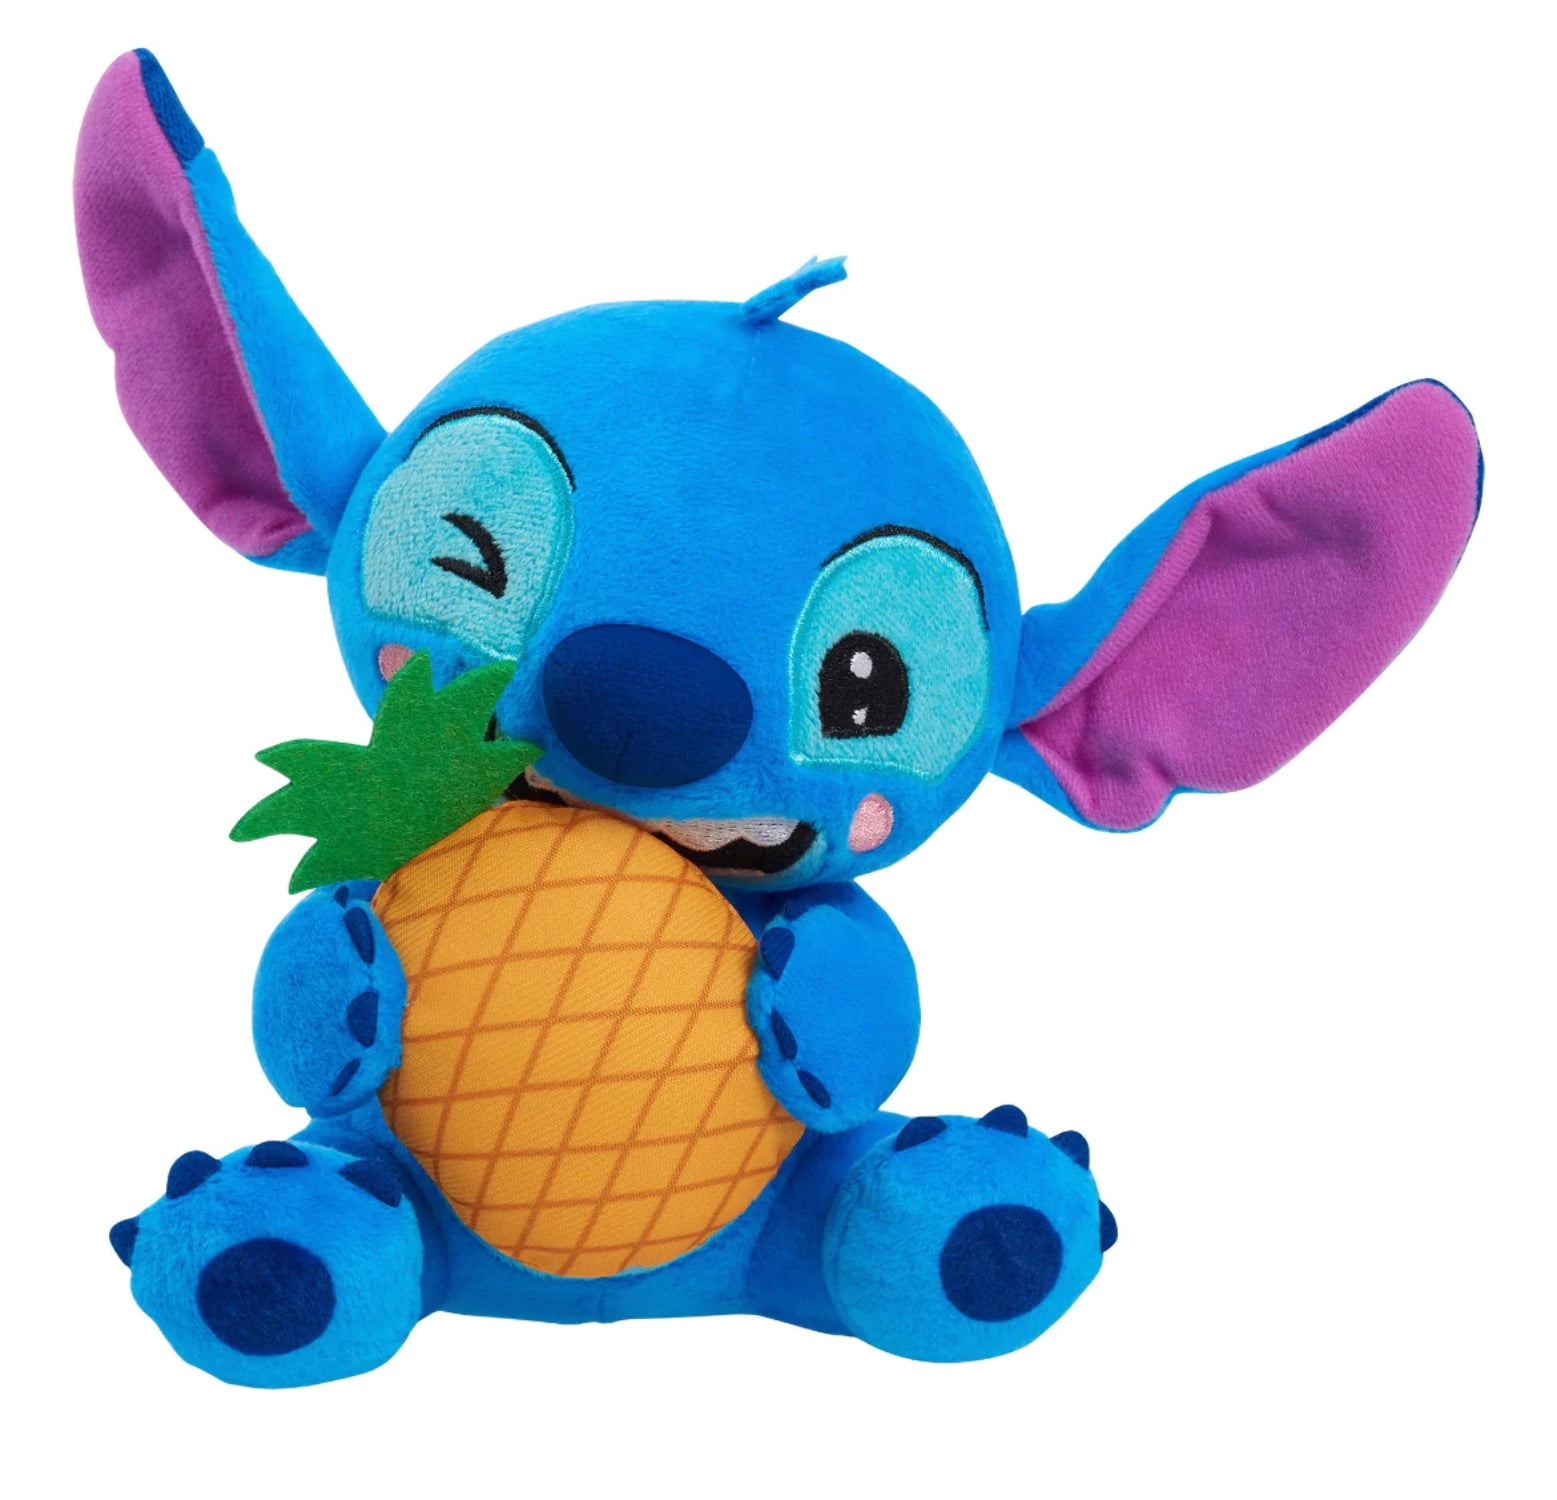 Disney Collection Limited Stitch All 12 Month Series Plush Toys Gifts for  Kids Girls Lilo & Stitch Stuffed Plush Toys